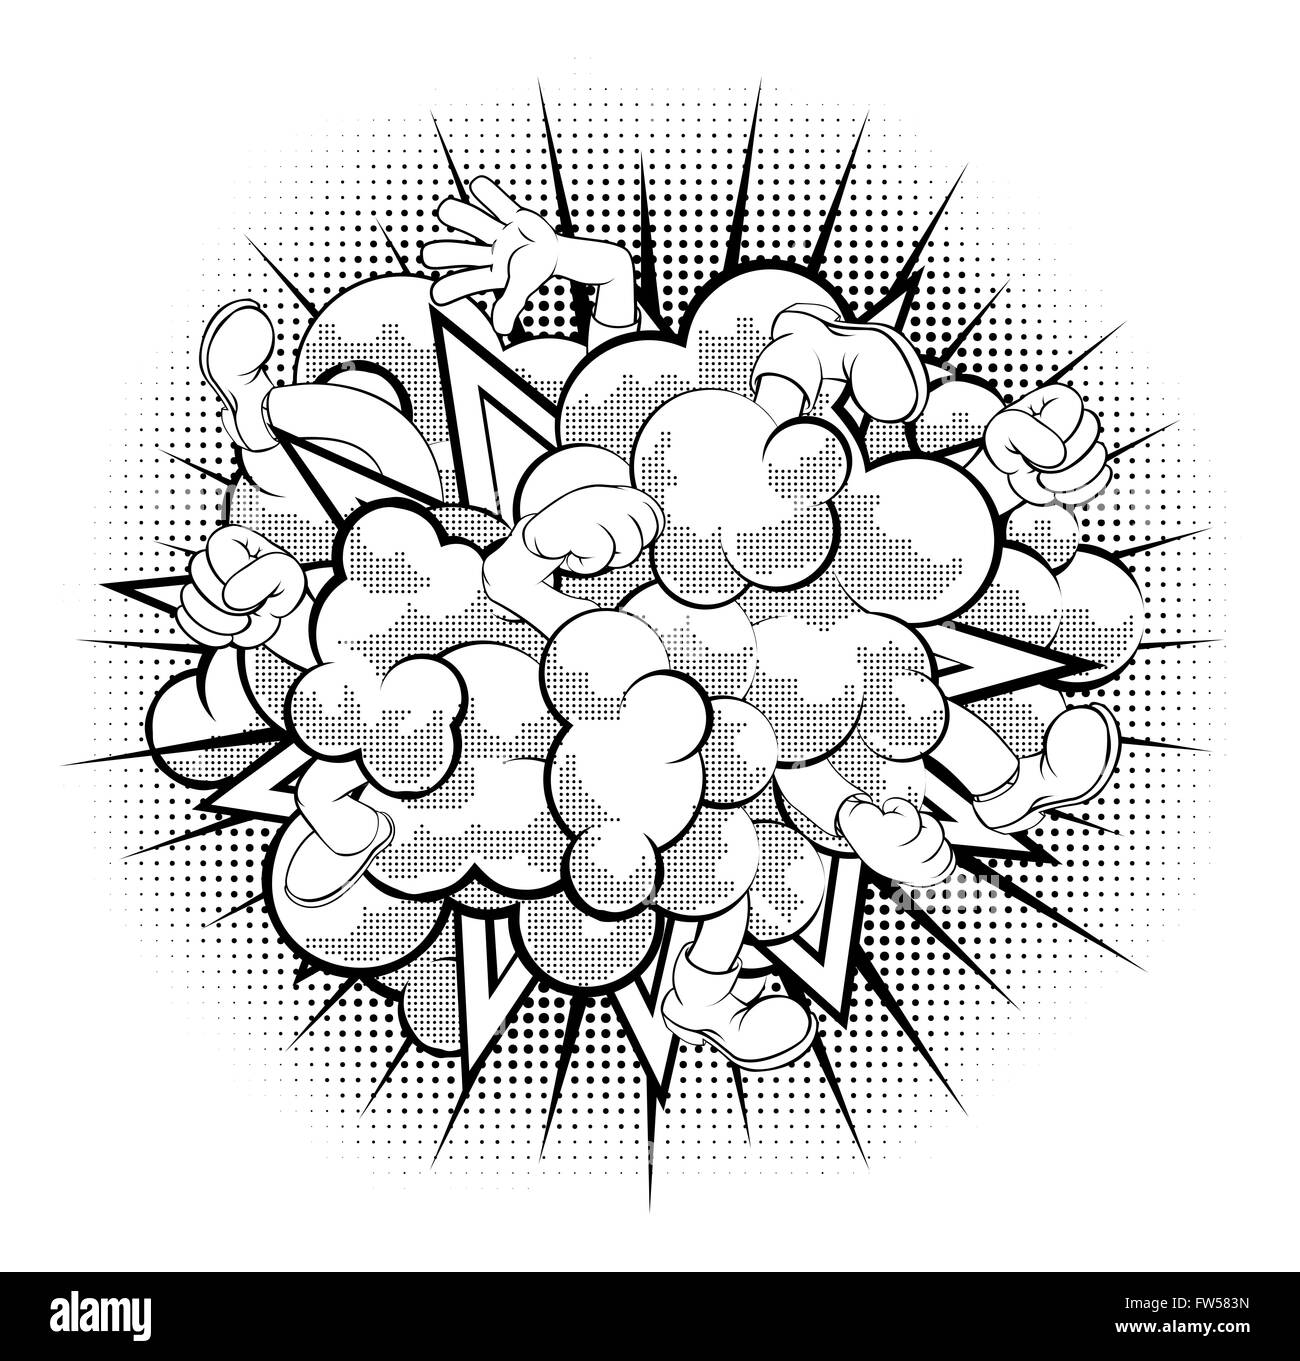 A black and white half-tone shaded comic book or cartoon dust cloud fight Stock Photo